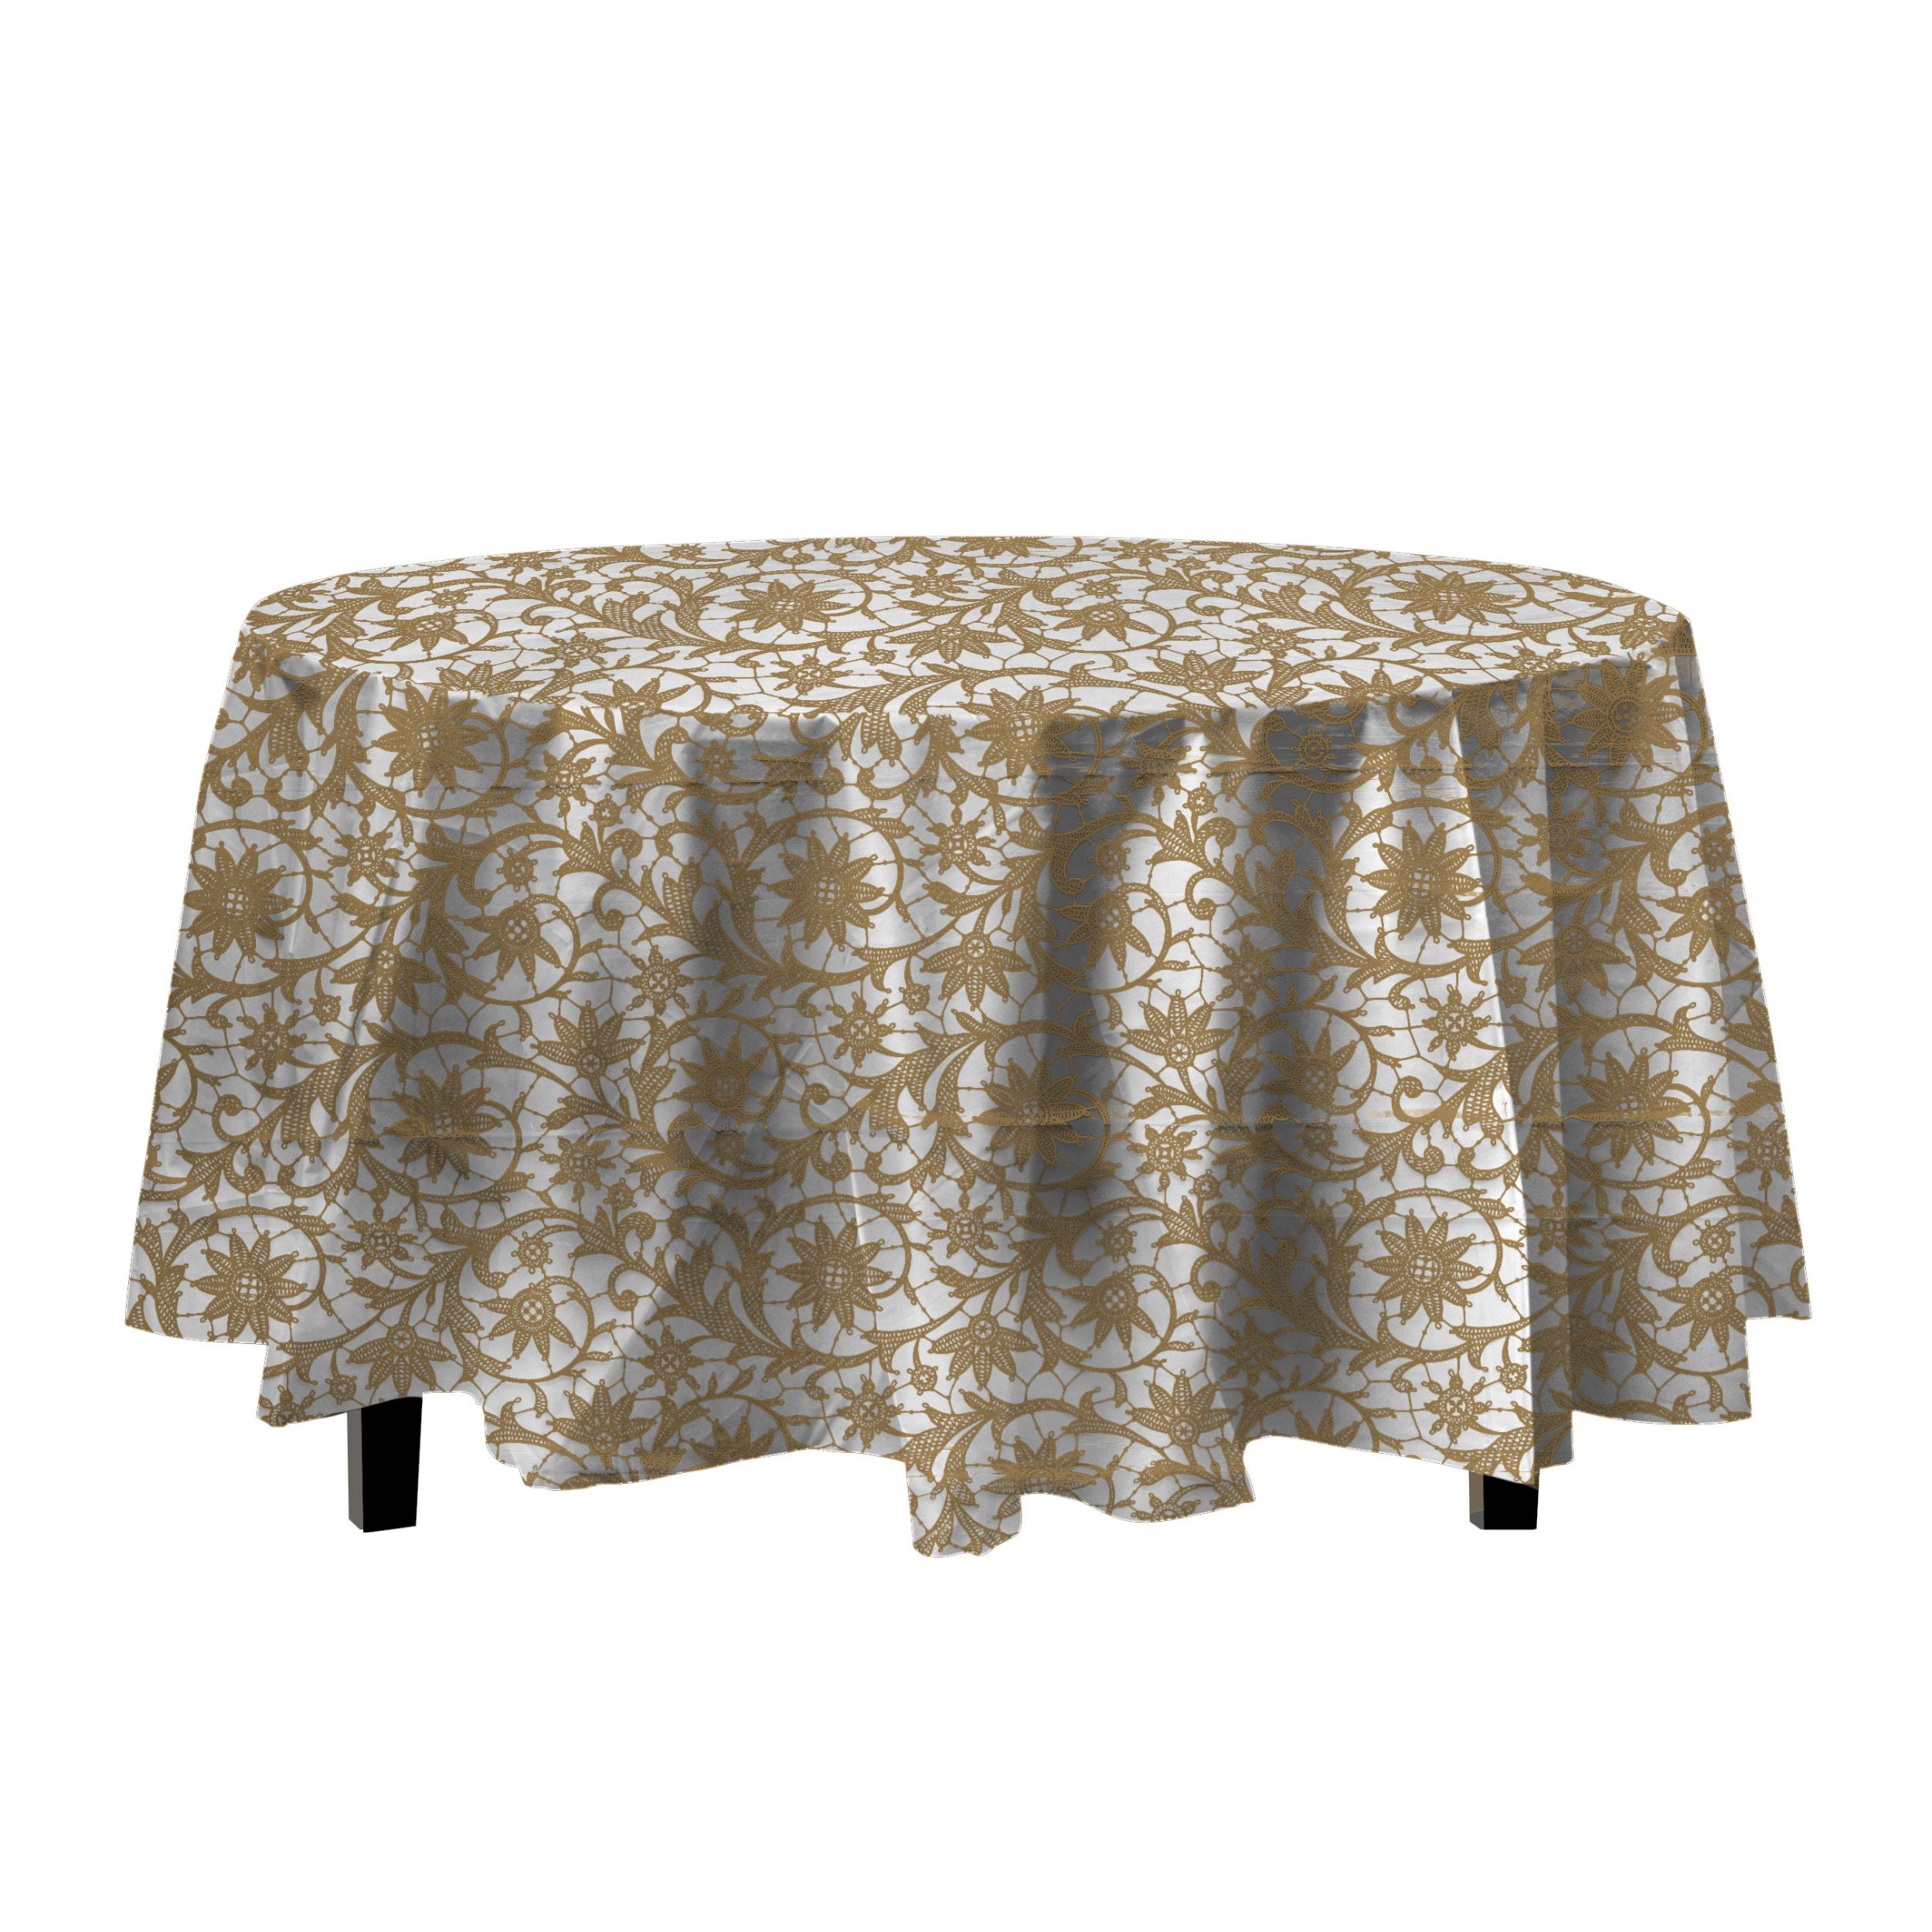 Gold Lace Printed Round Plastic Tablecloth | 48 Count